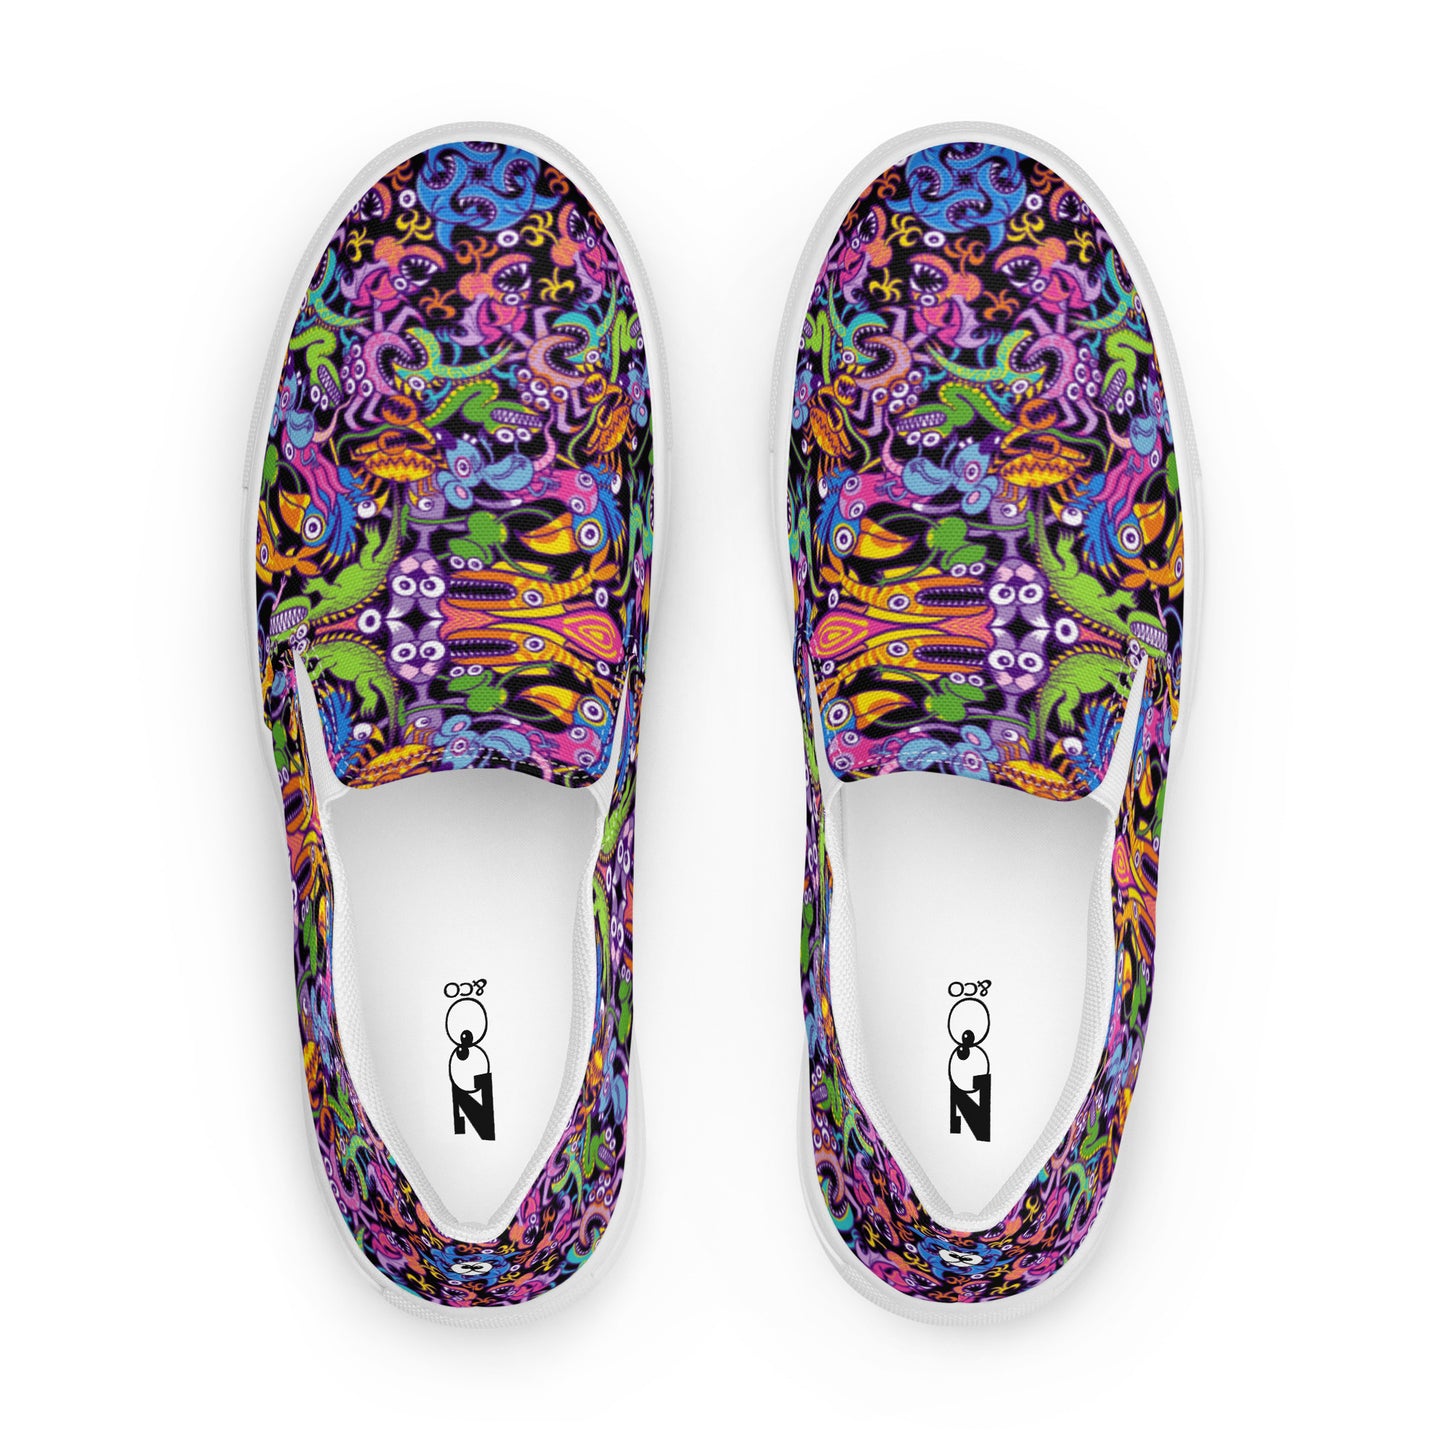 Eccentric critters in a lively crazy festival Men’s slip-on canvas shoes. Top view